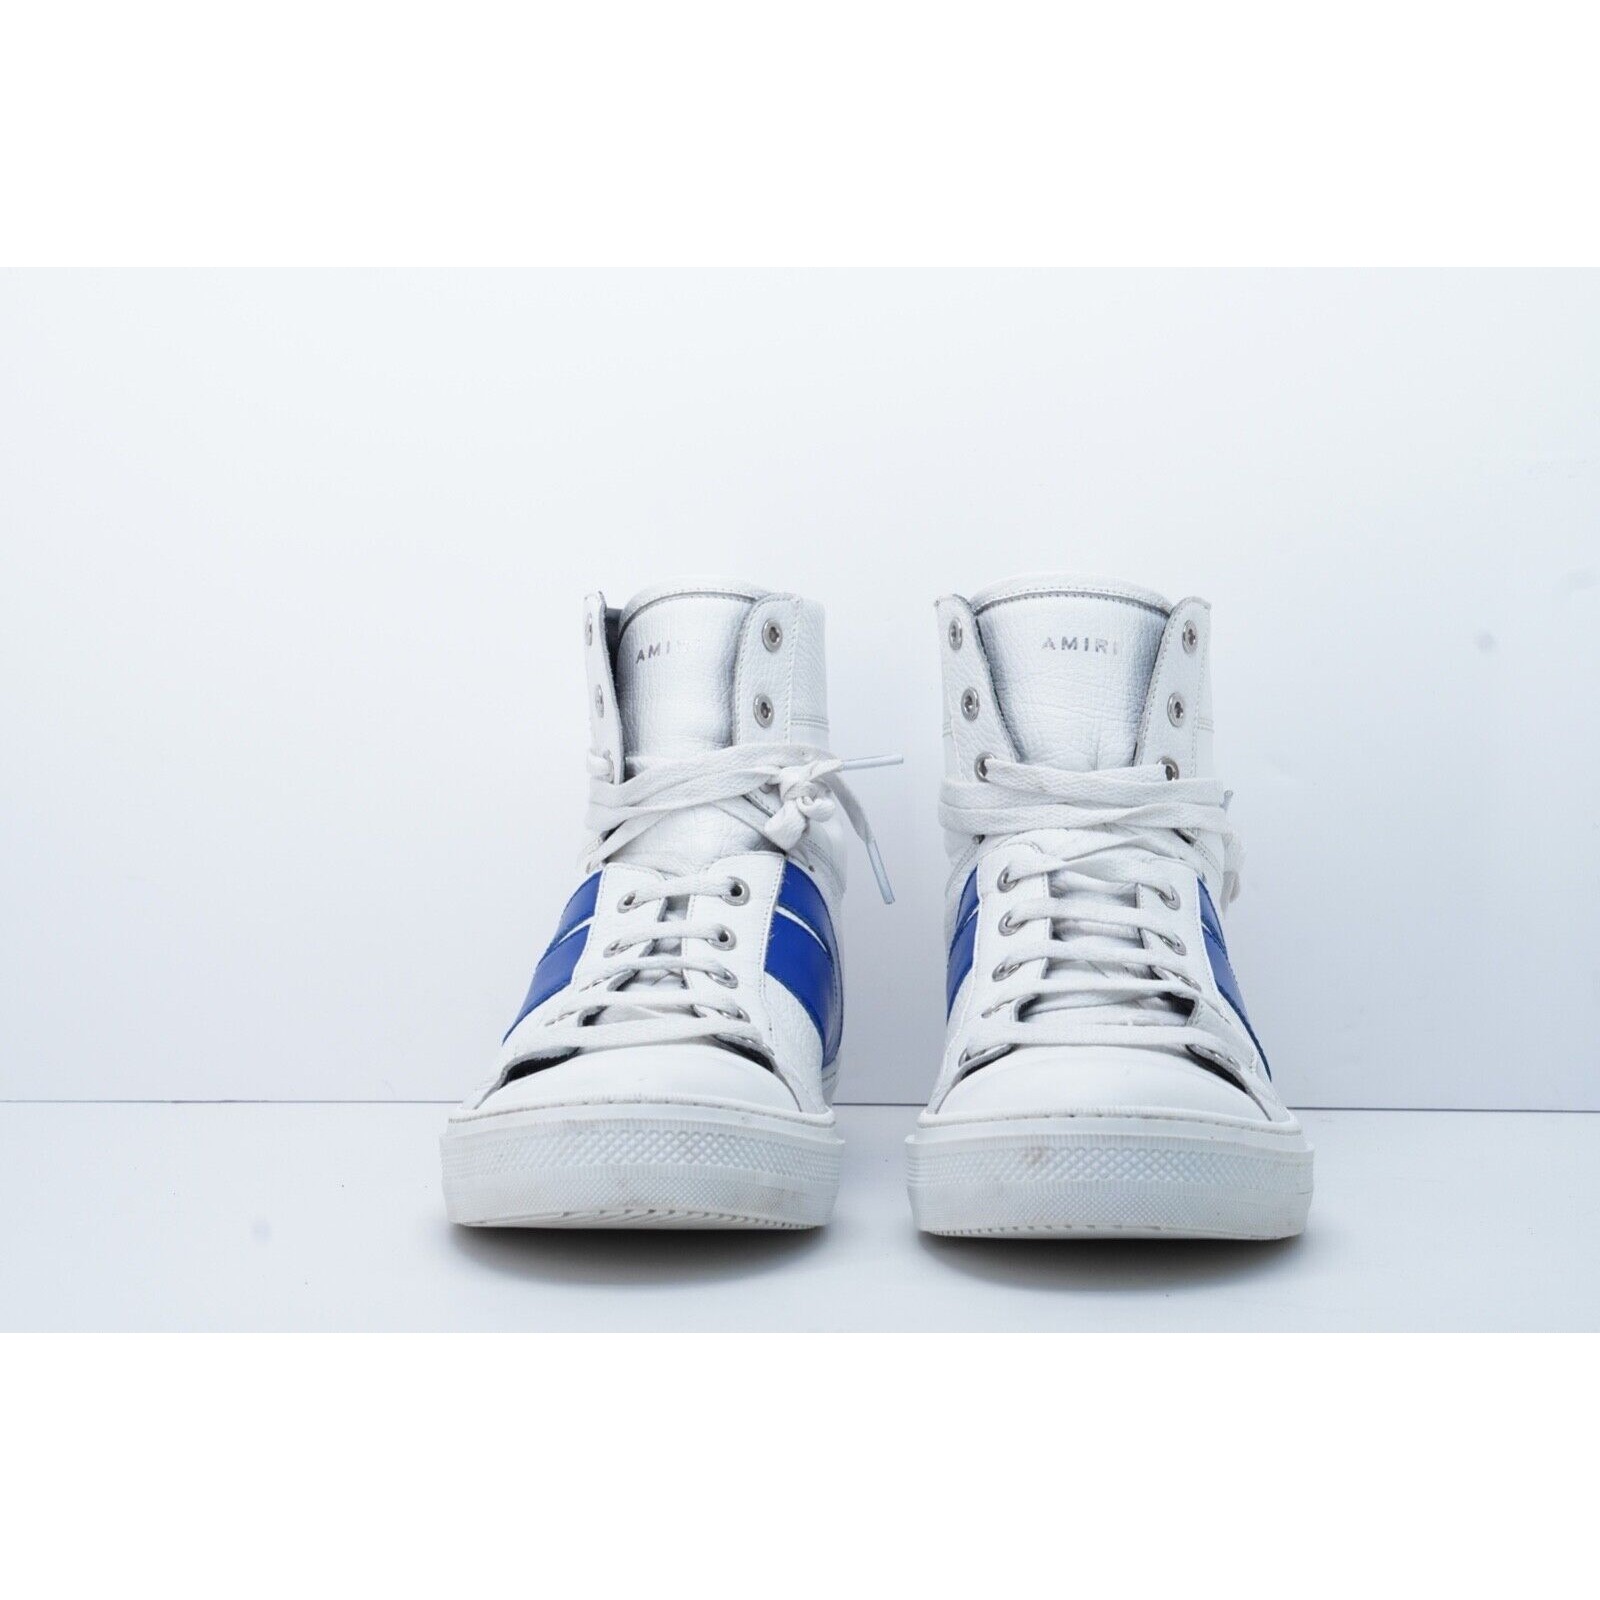 Amiri Sunset Sneakers White Blue High Top Lace Up $595 - Siz - 3